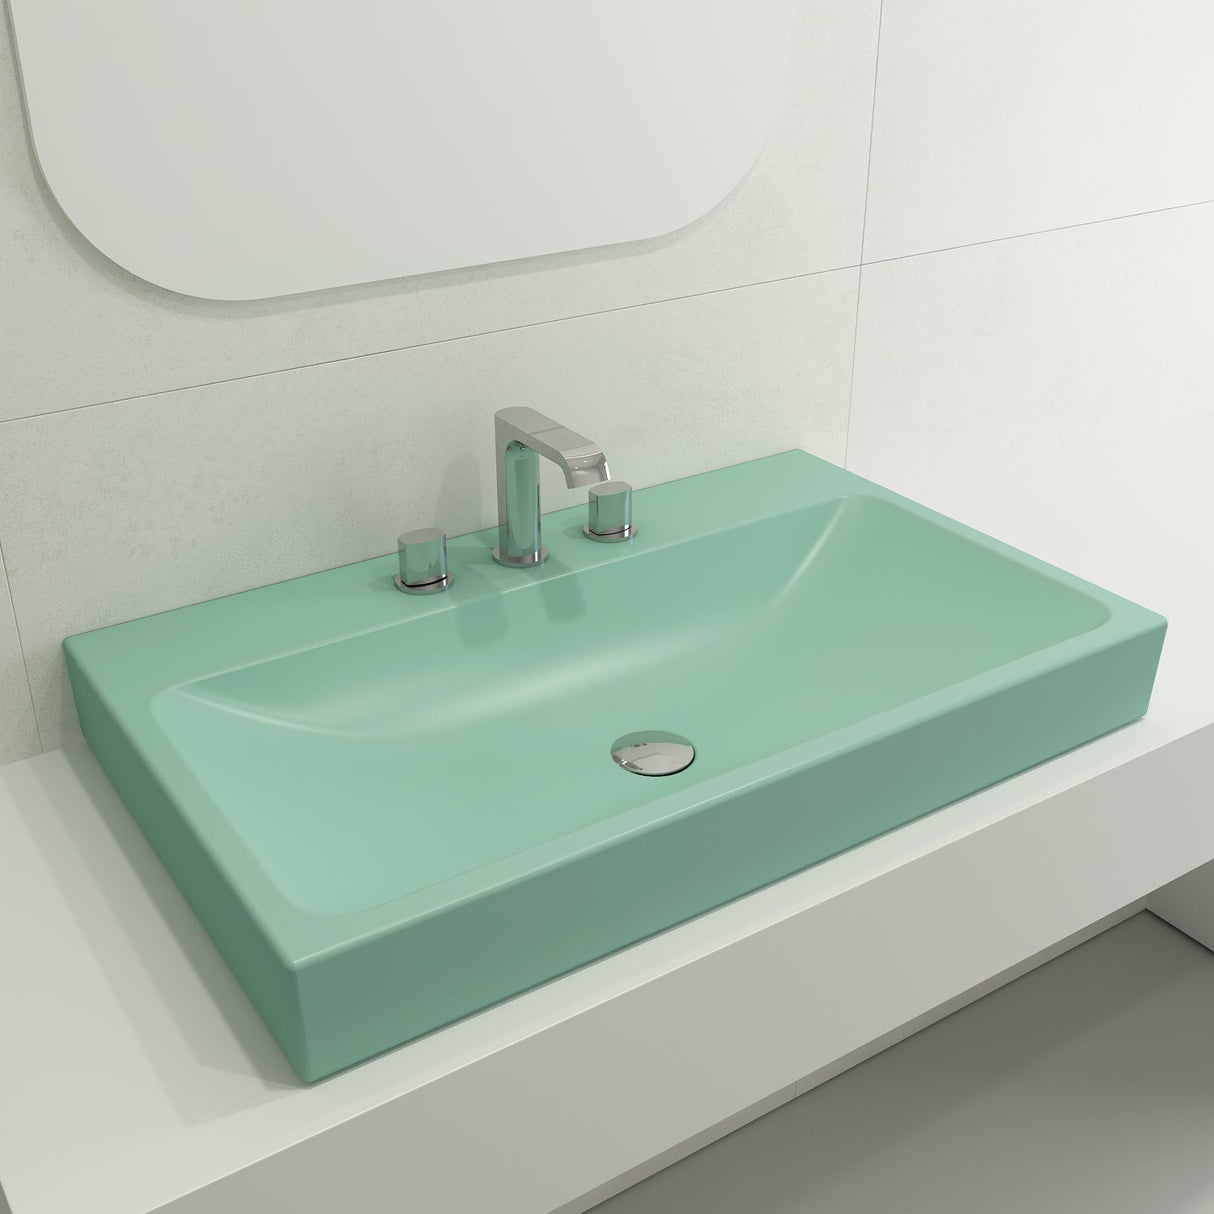 BOCCHI 1078-033-0127 Scala Arch Wall-Mounted Sink Fireclay 32 in. 3-Hole in Matte Mint Green